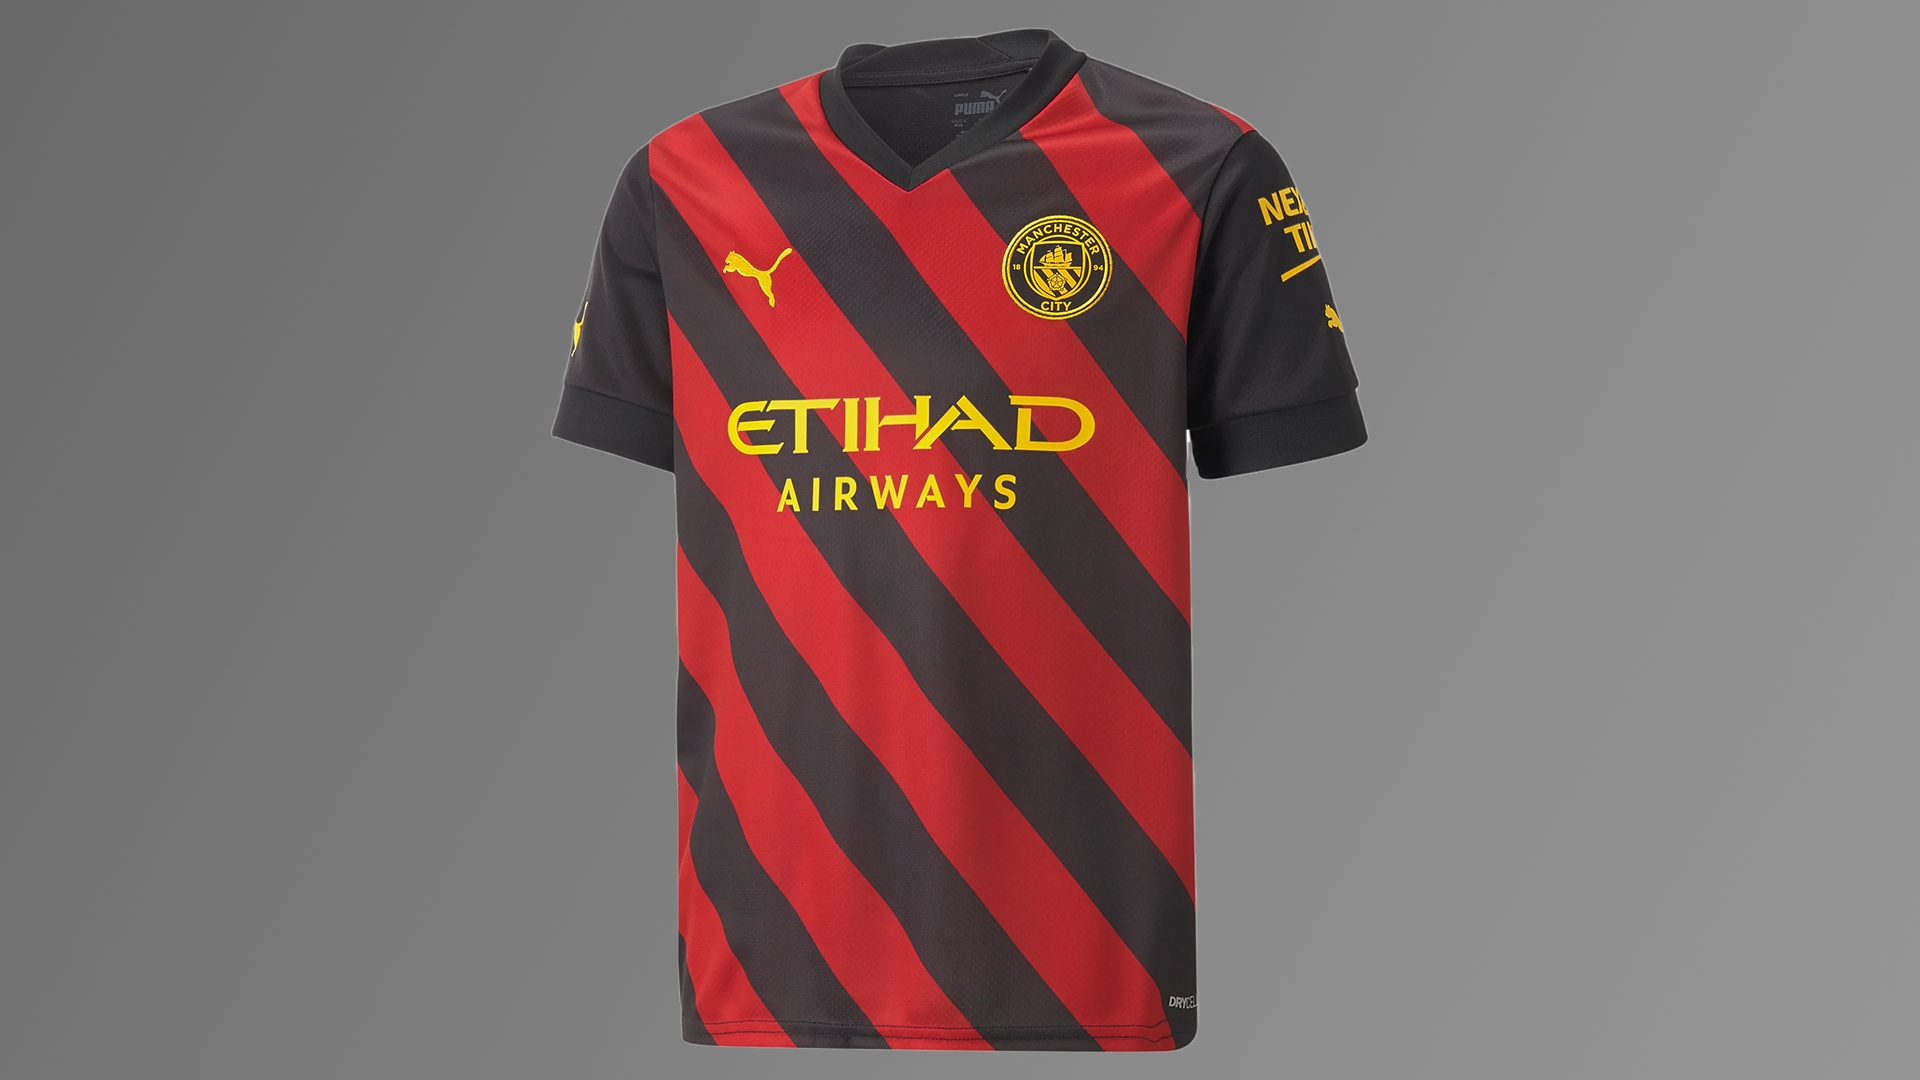 Man City Away Kit For 2022 23 Puts Modern Twist On Classic Designs From 1960s & 70s